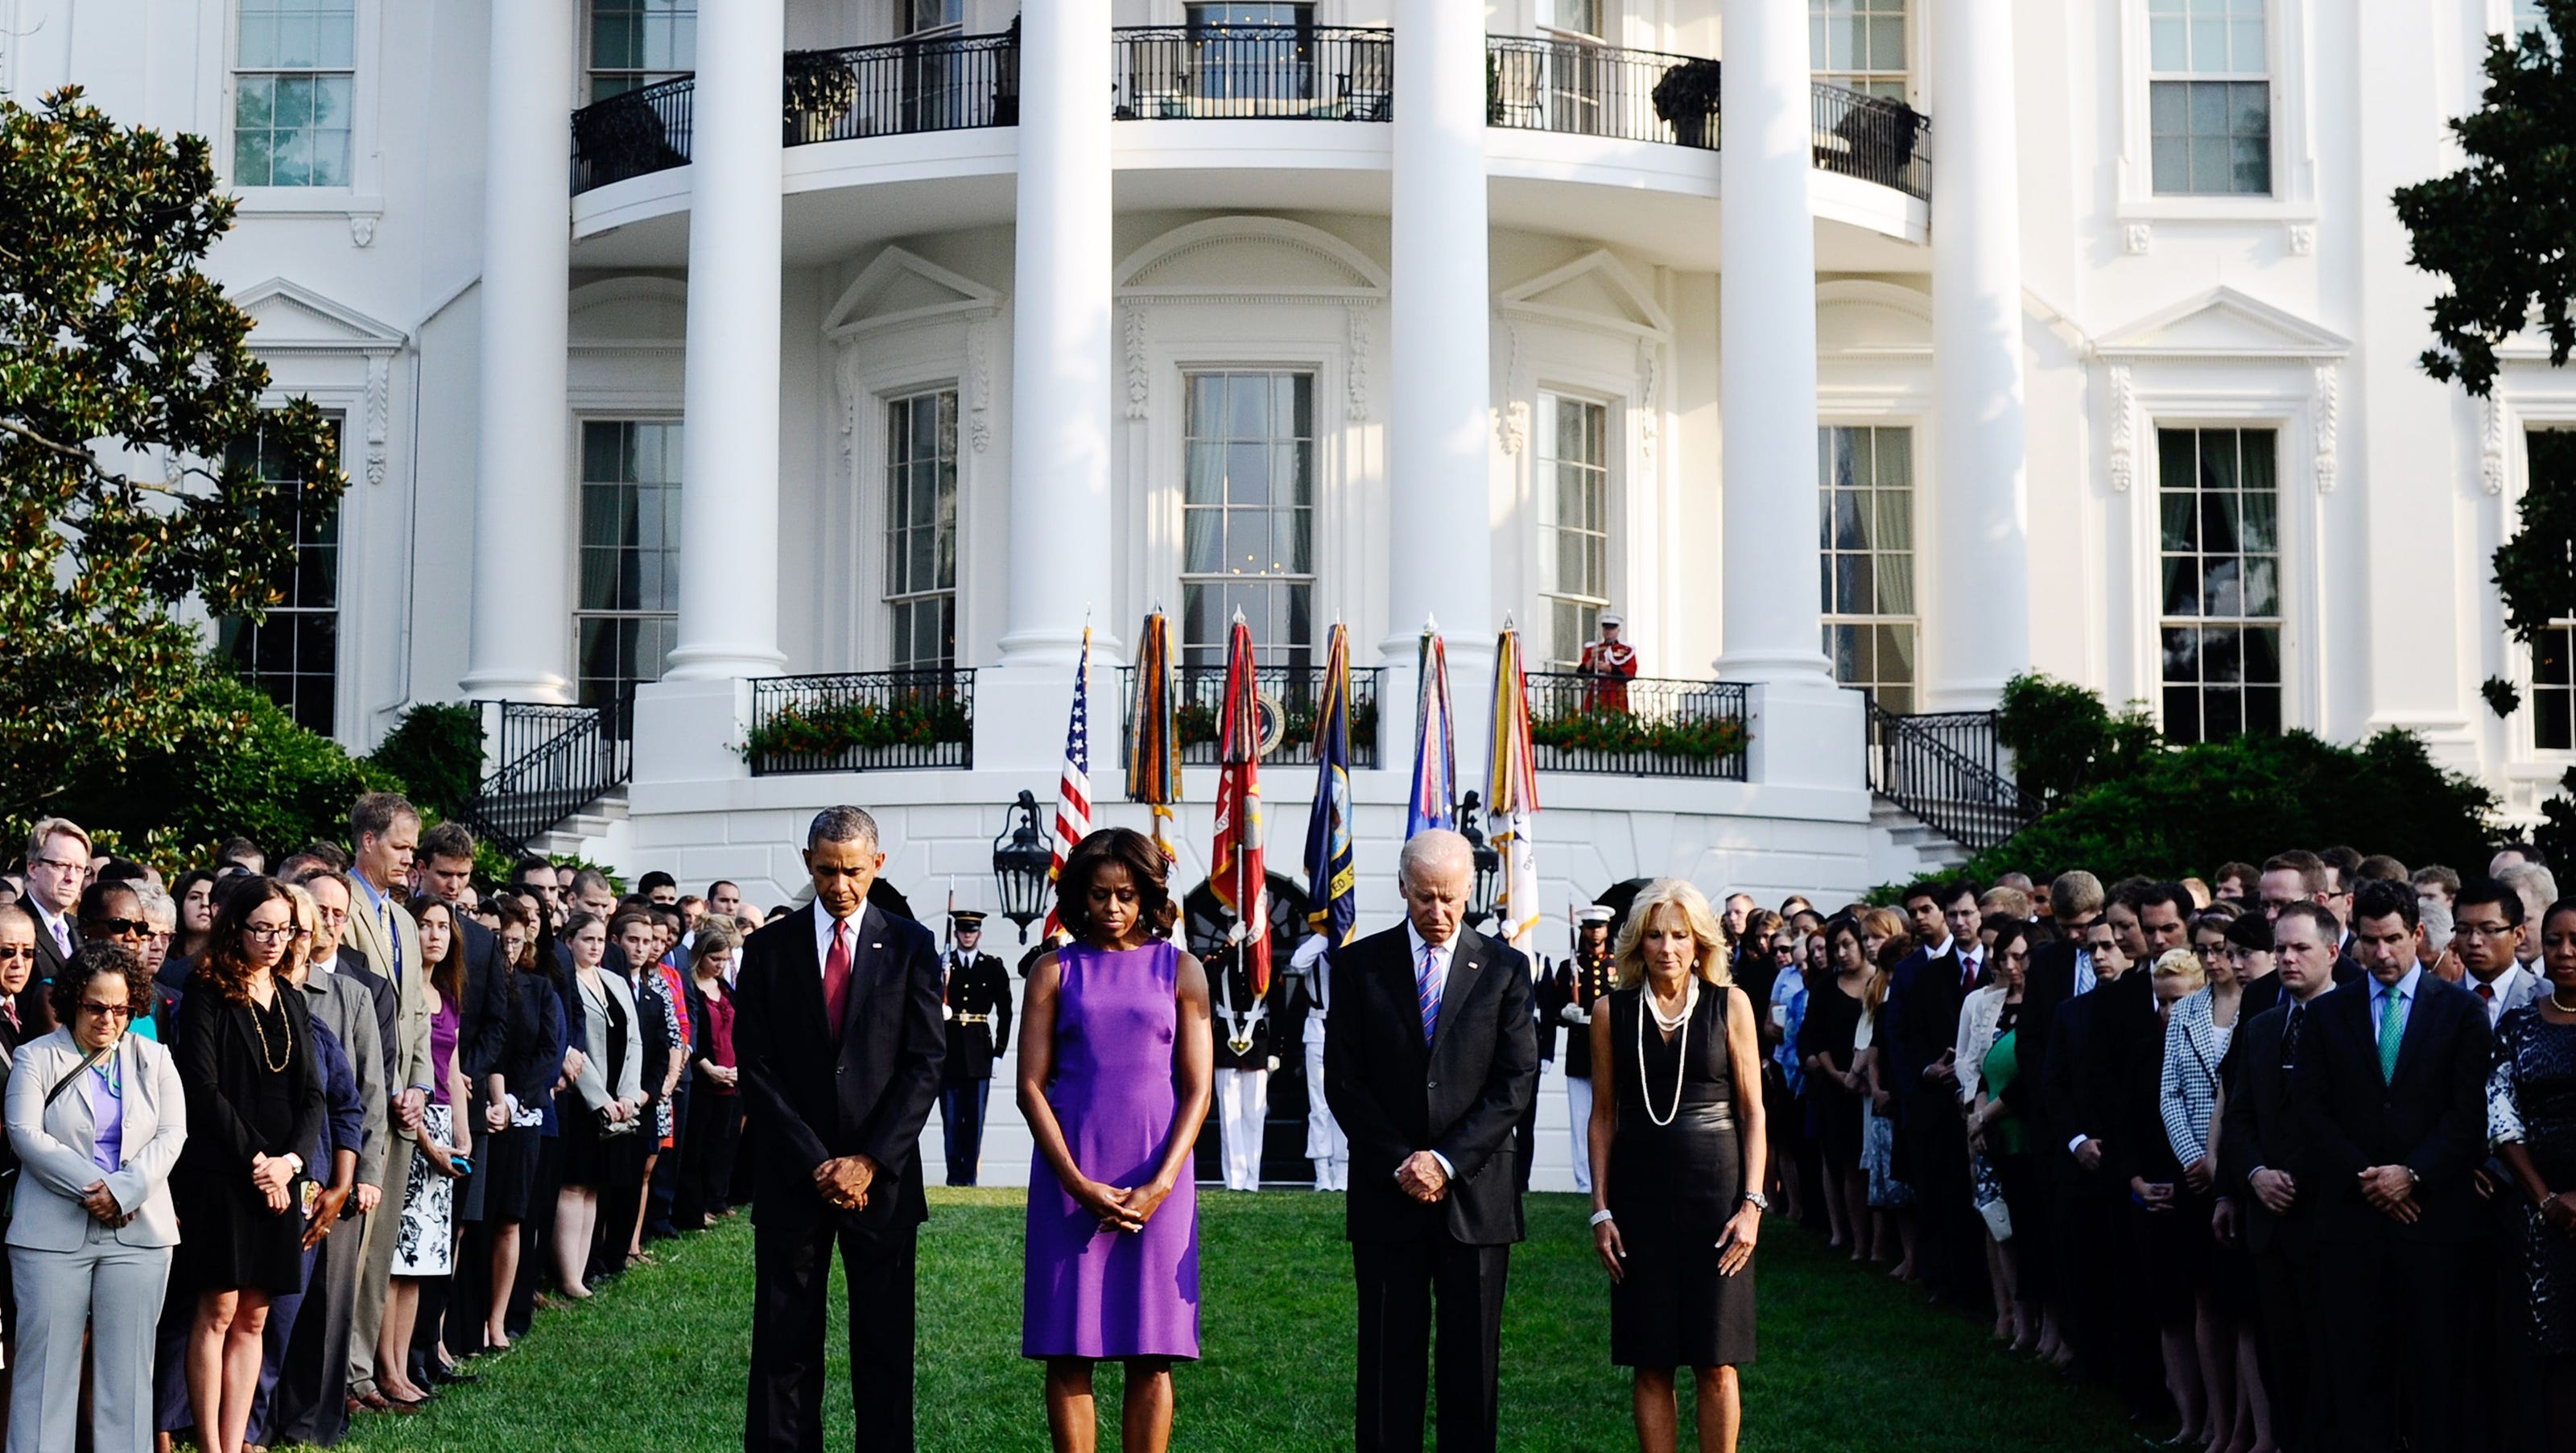 Obama pays tribute to 9/11 victims, survivors